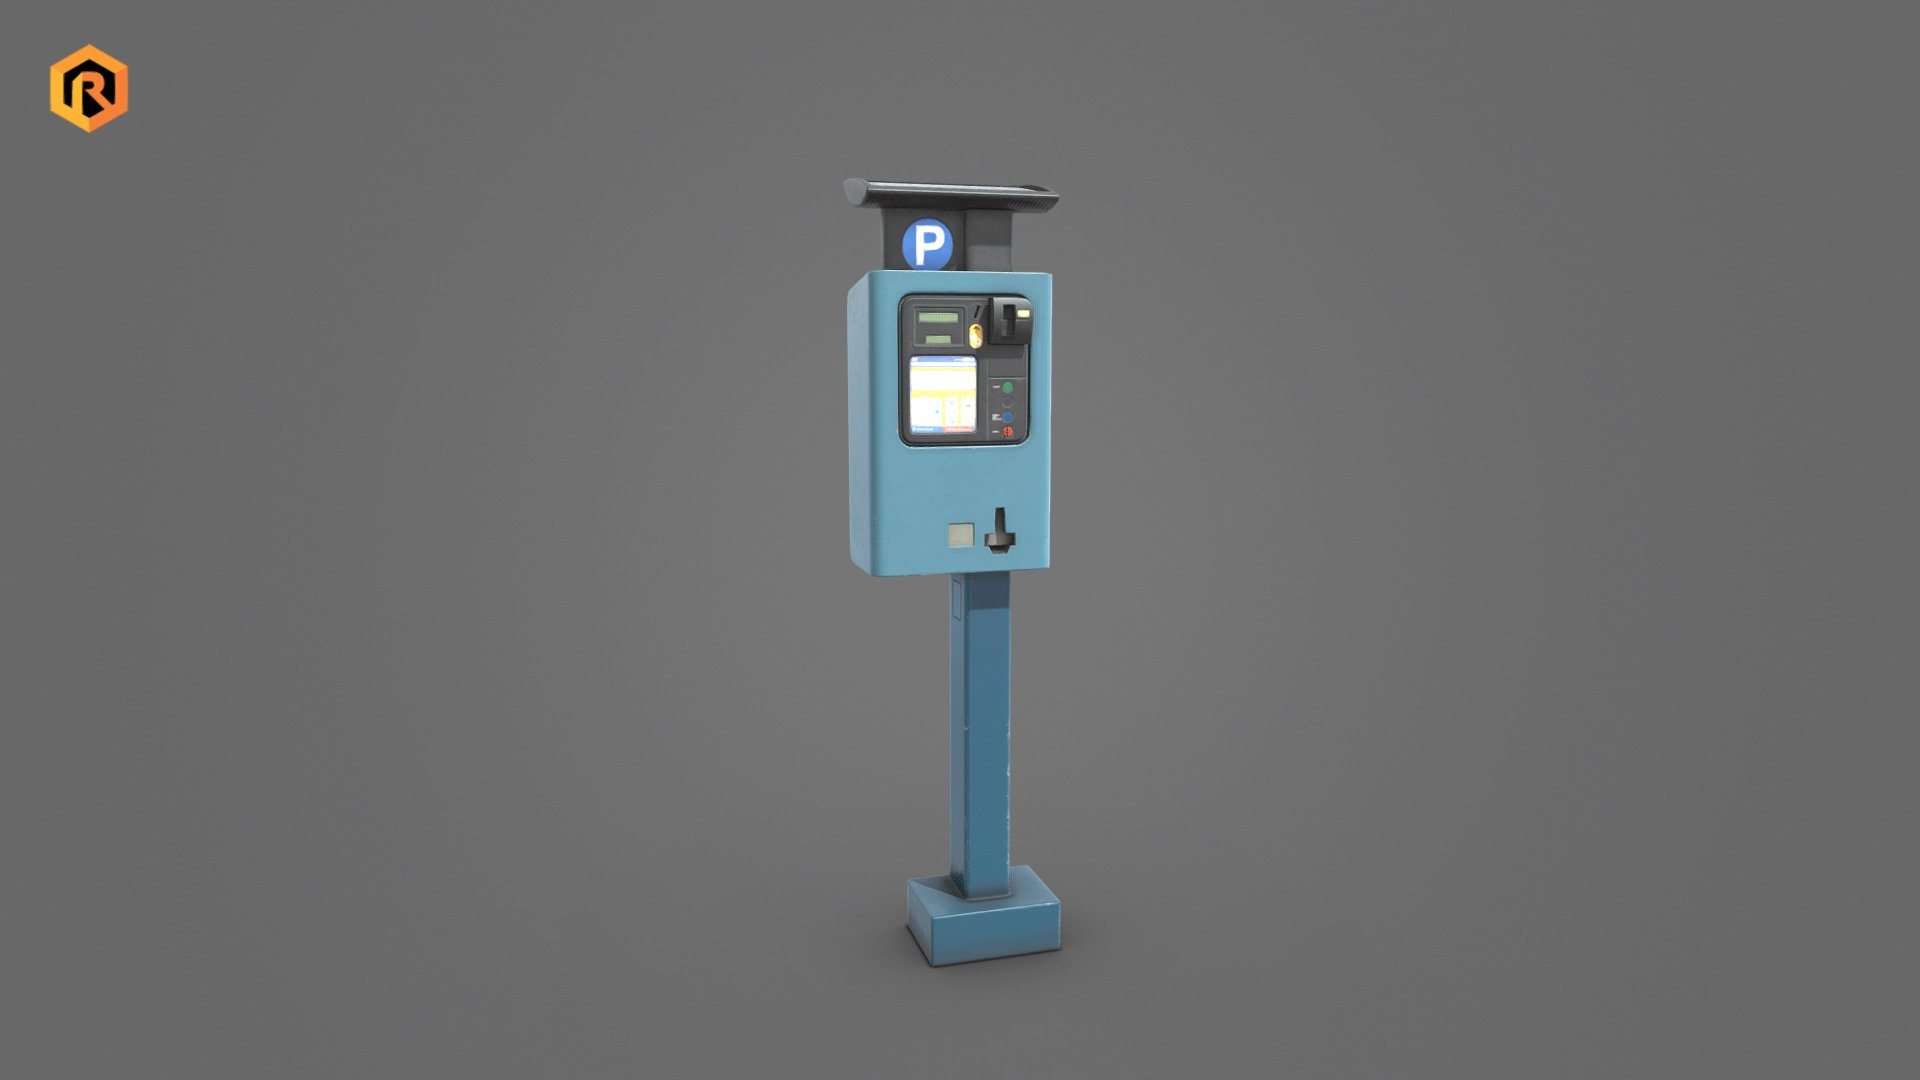 Low-poly PBR 3D model of Parking Meter.

This object is best for use in games and other real-time applications such as Unity or Unreal Engine. 

It can also be rendered in Blender (ex Cycles) or Vray as the model is equipped with all required textures.  

Technical details:  




2048 PBR Texture Set (Albedo, Metallic, Smoothness, Normal, AO)

1207 Triangles

1243  Vertices

Model is one mesh

Pivot points are correctly placed

Model scaled to approximate real world size  

All nodes, materials and textures are appropriately named

Lot of additional file formats included (Blender, Unity, Maya etc.)

More file formats are available in additional zip file on product page.  

Please feel free to contact me if you have any questions or need support for this asset 3d model